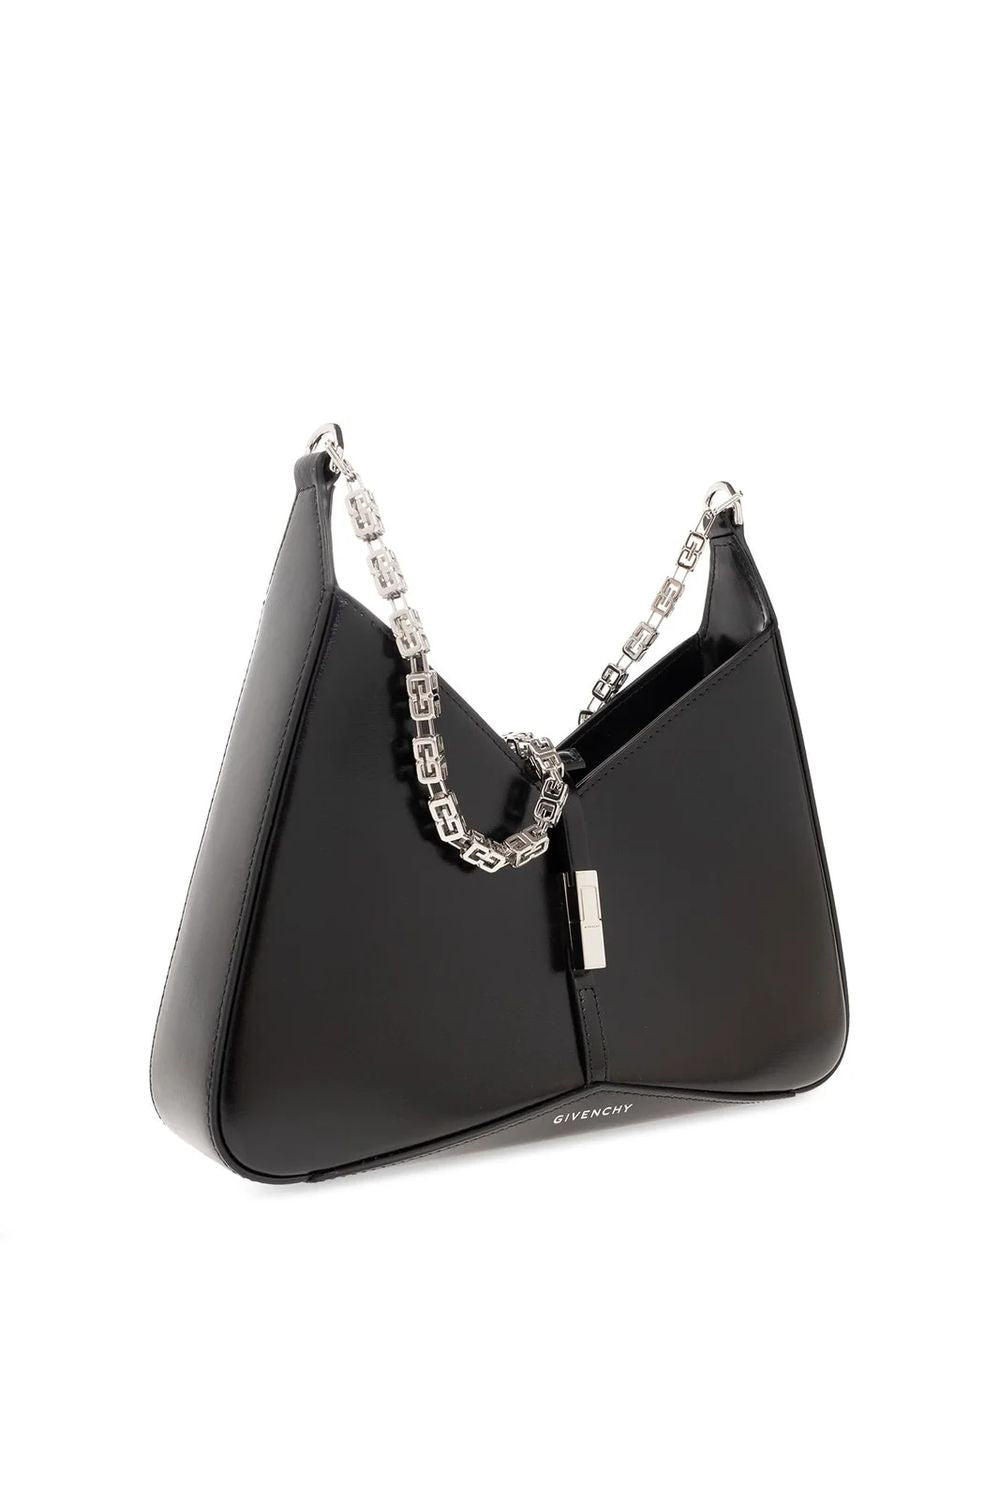 GIVENCHY Black Calfskin Leather Mini Shoulder Bag with Chain Detail and Magnetic Metal Buckle